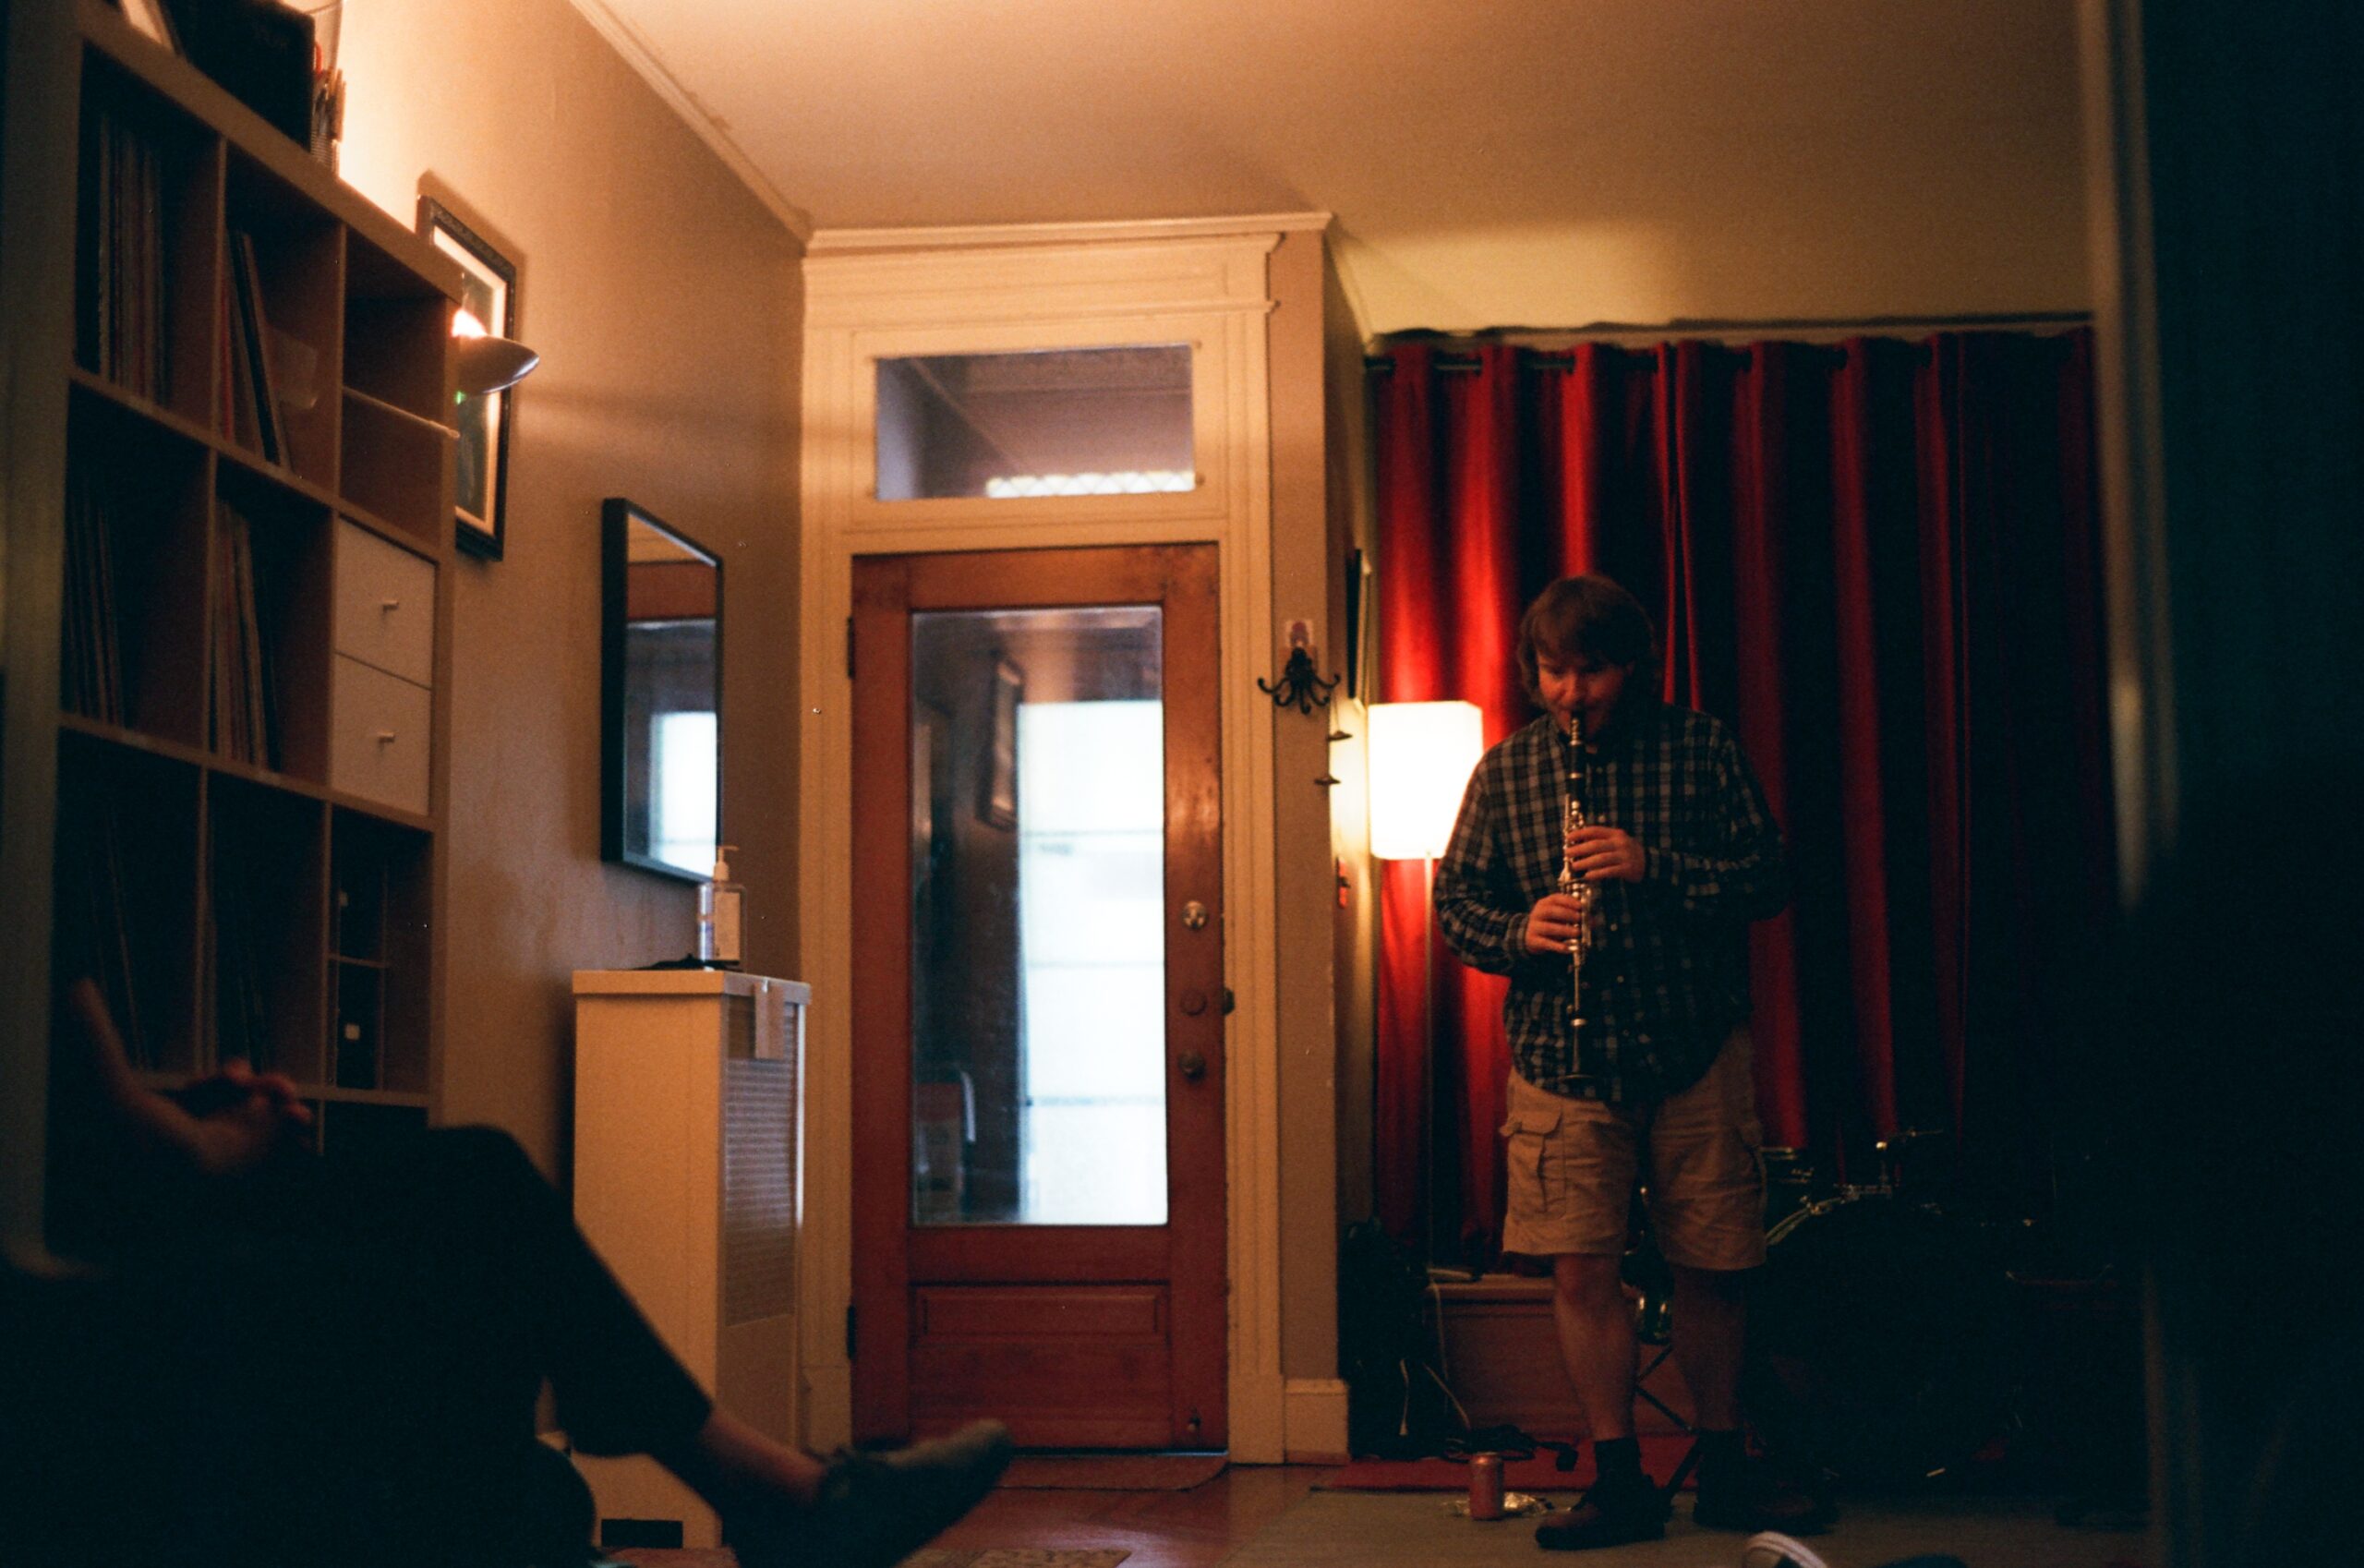 A clarinetist plays in front of red curtains